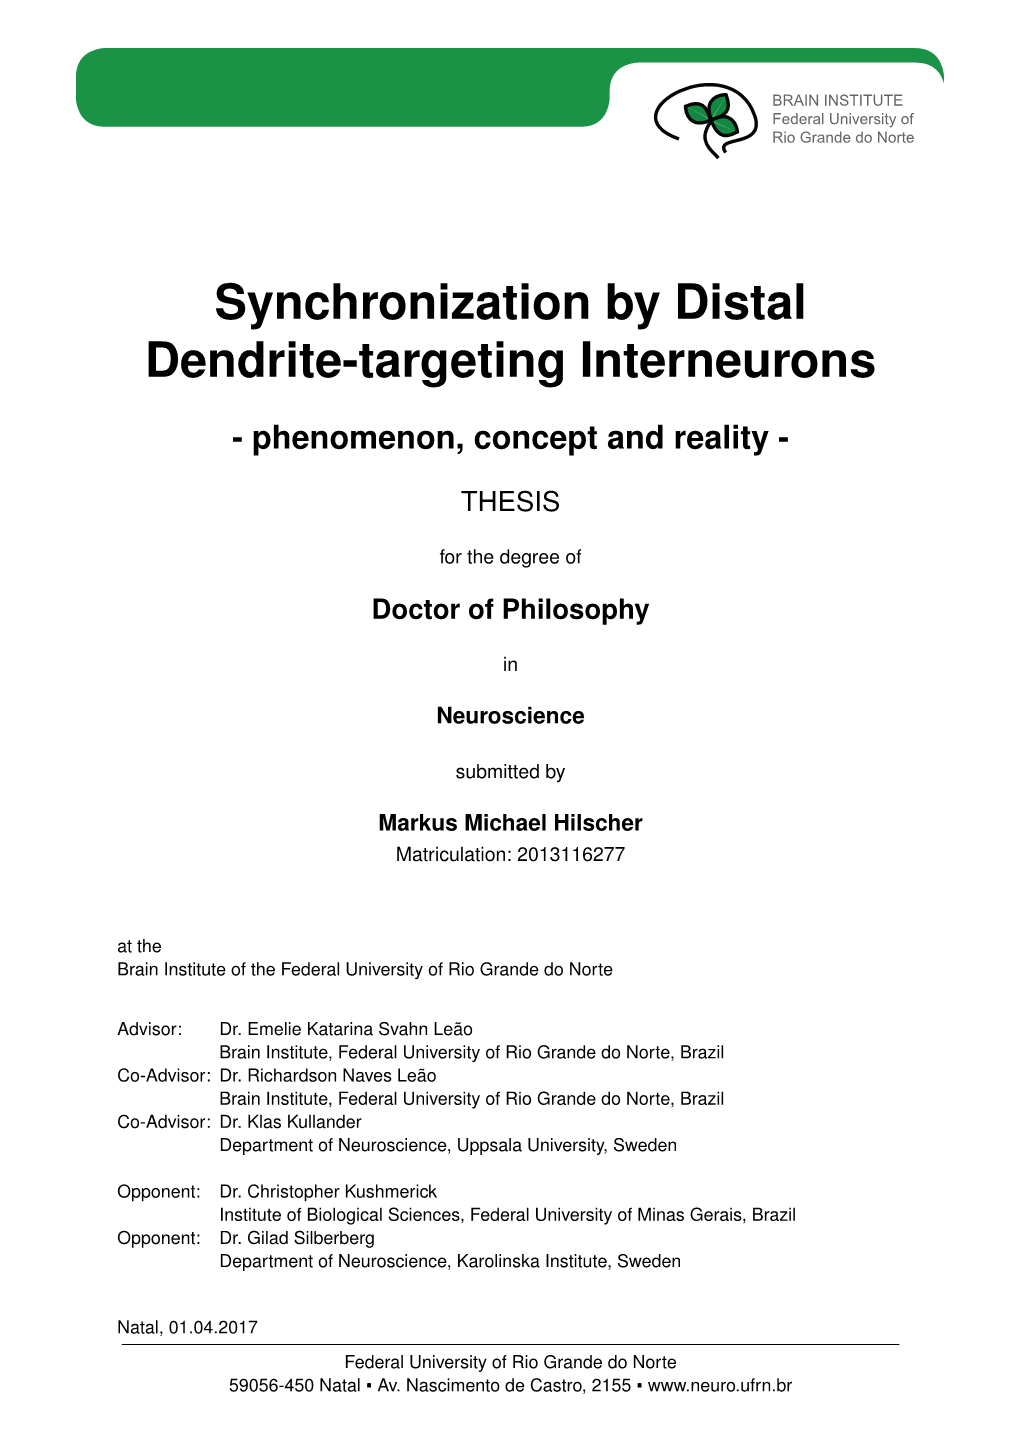 Synchronization by Distal Dendrite-Targeting Interneurons